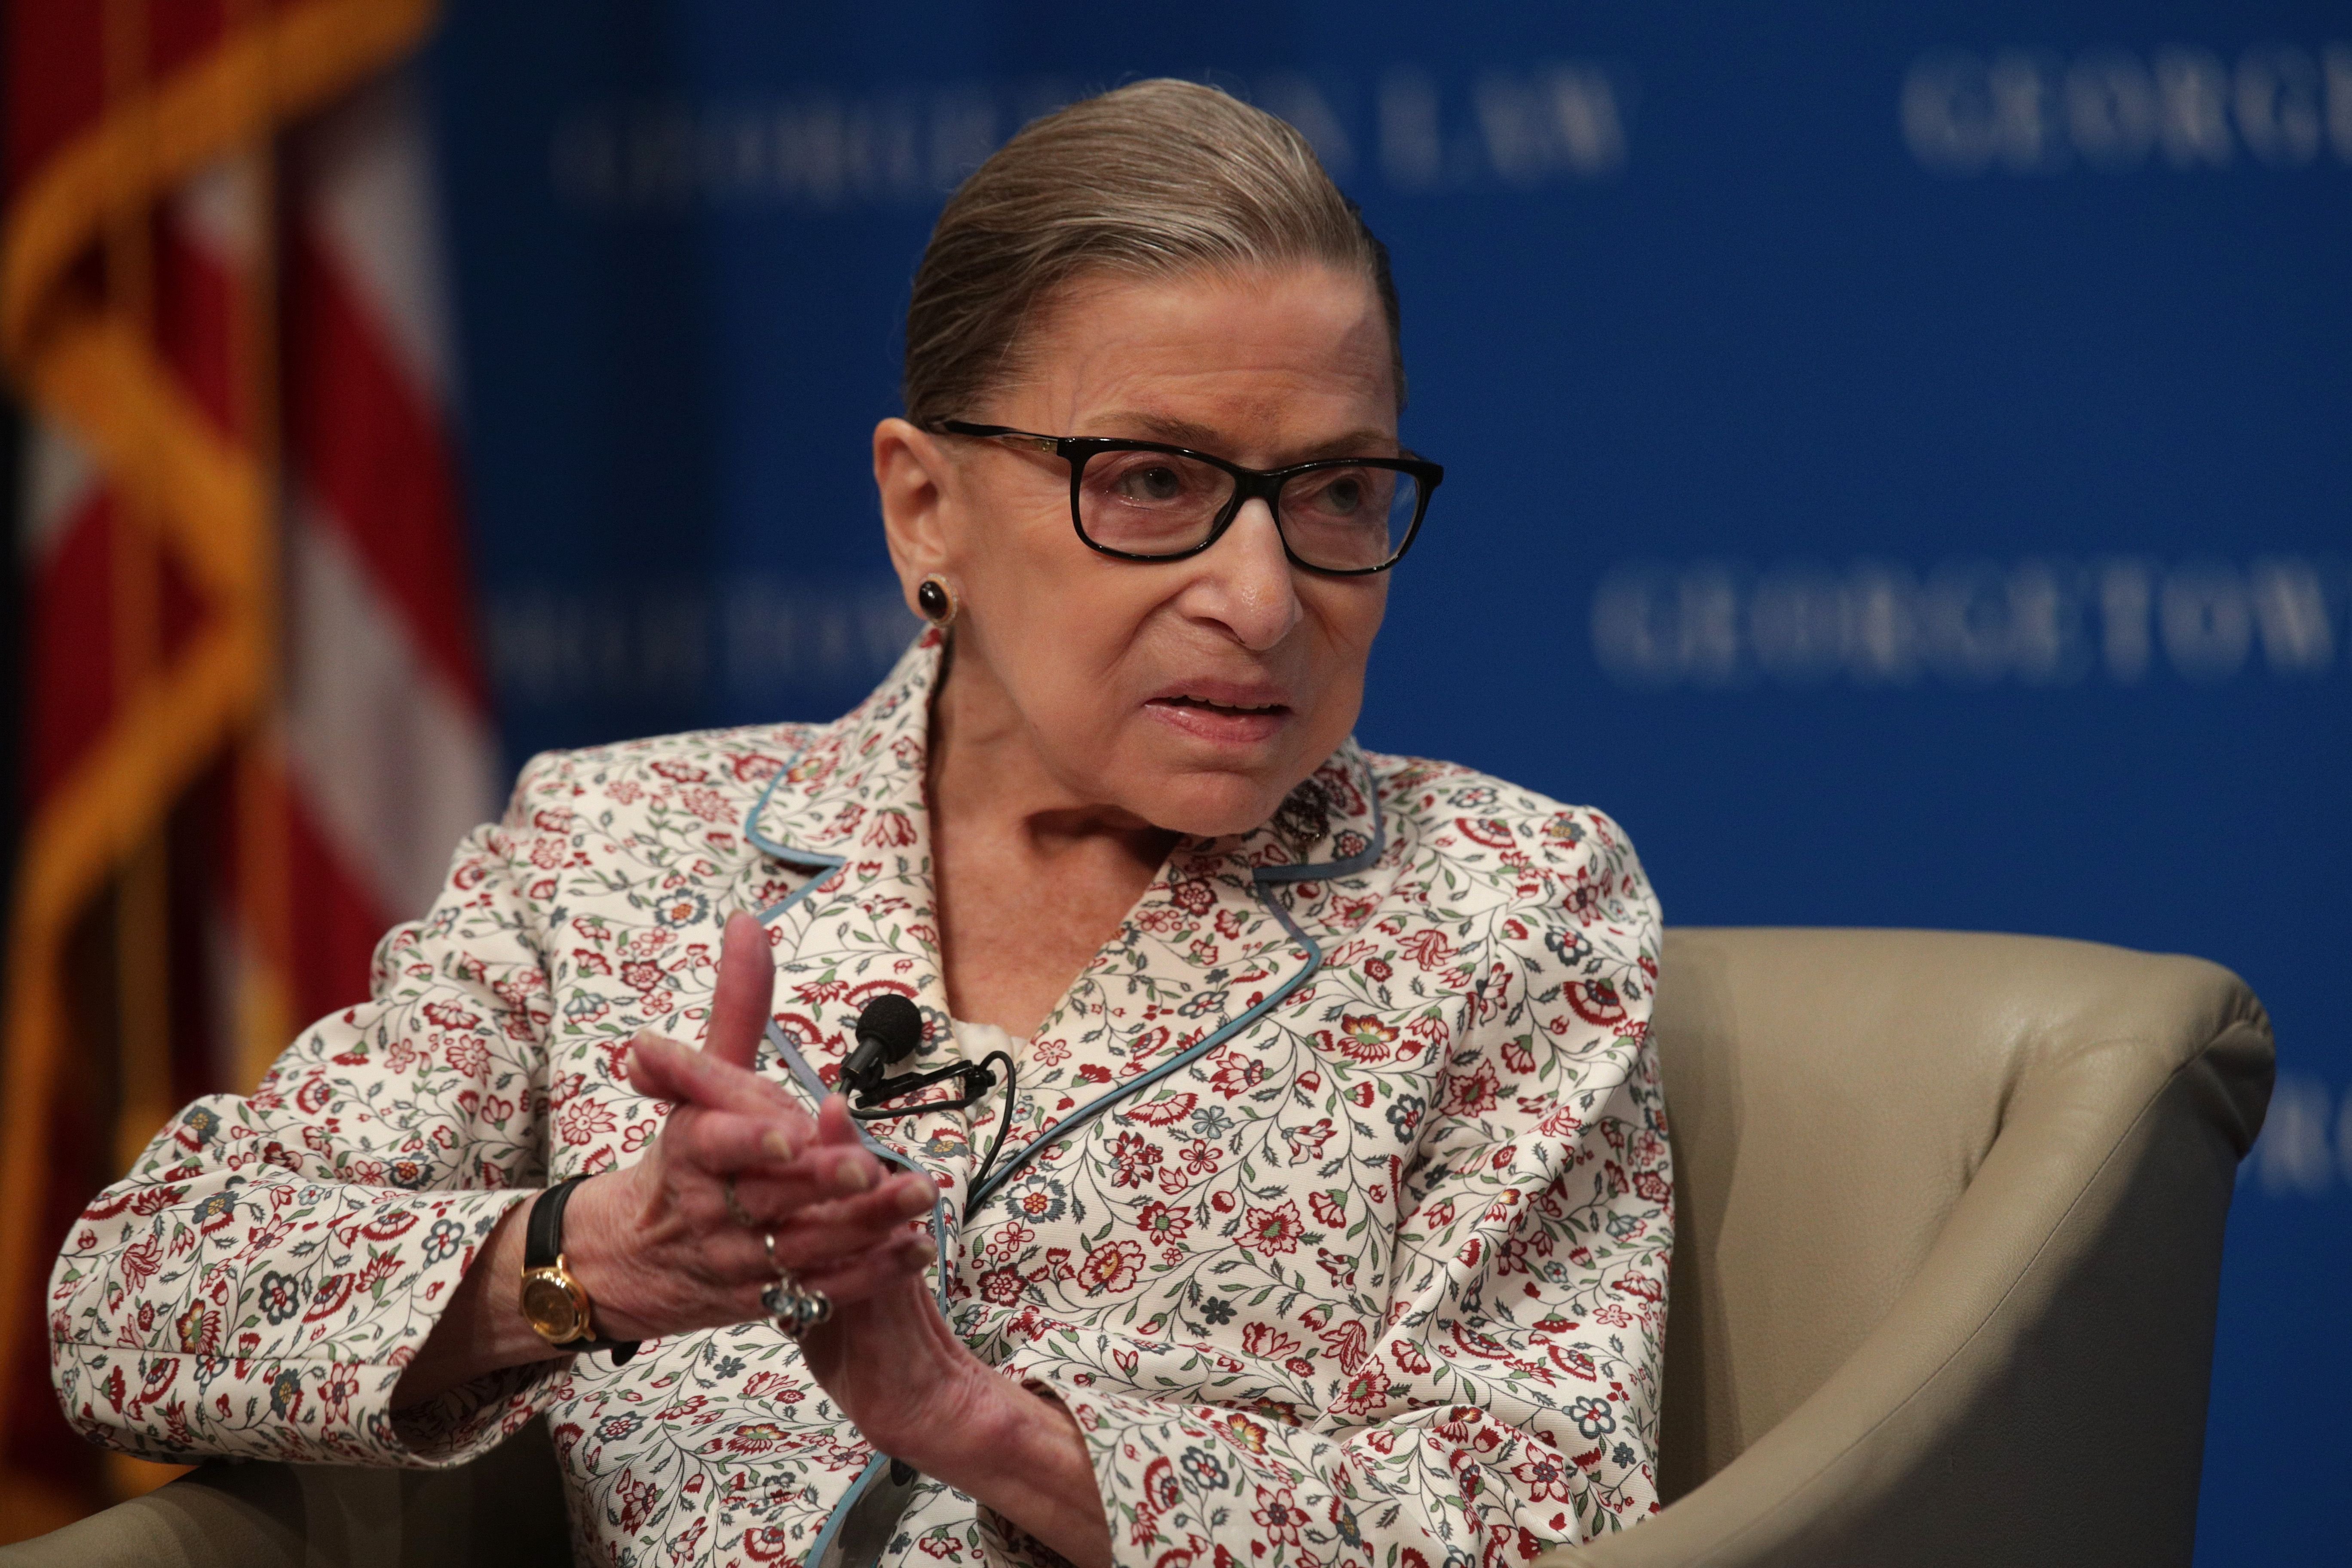 Ruth Bader Ginsburg participates in a discussion at Georgetown University Law Center July 2, 2019 | Photo: Getty Images